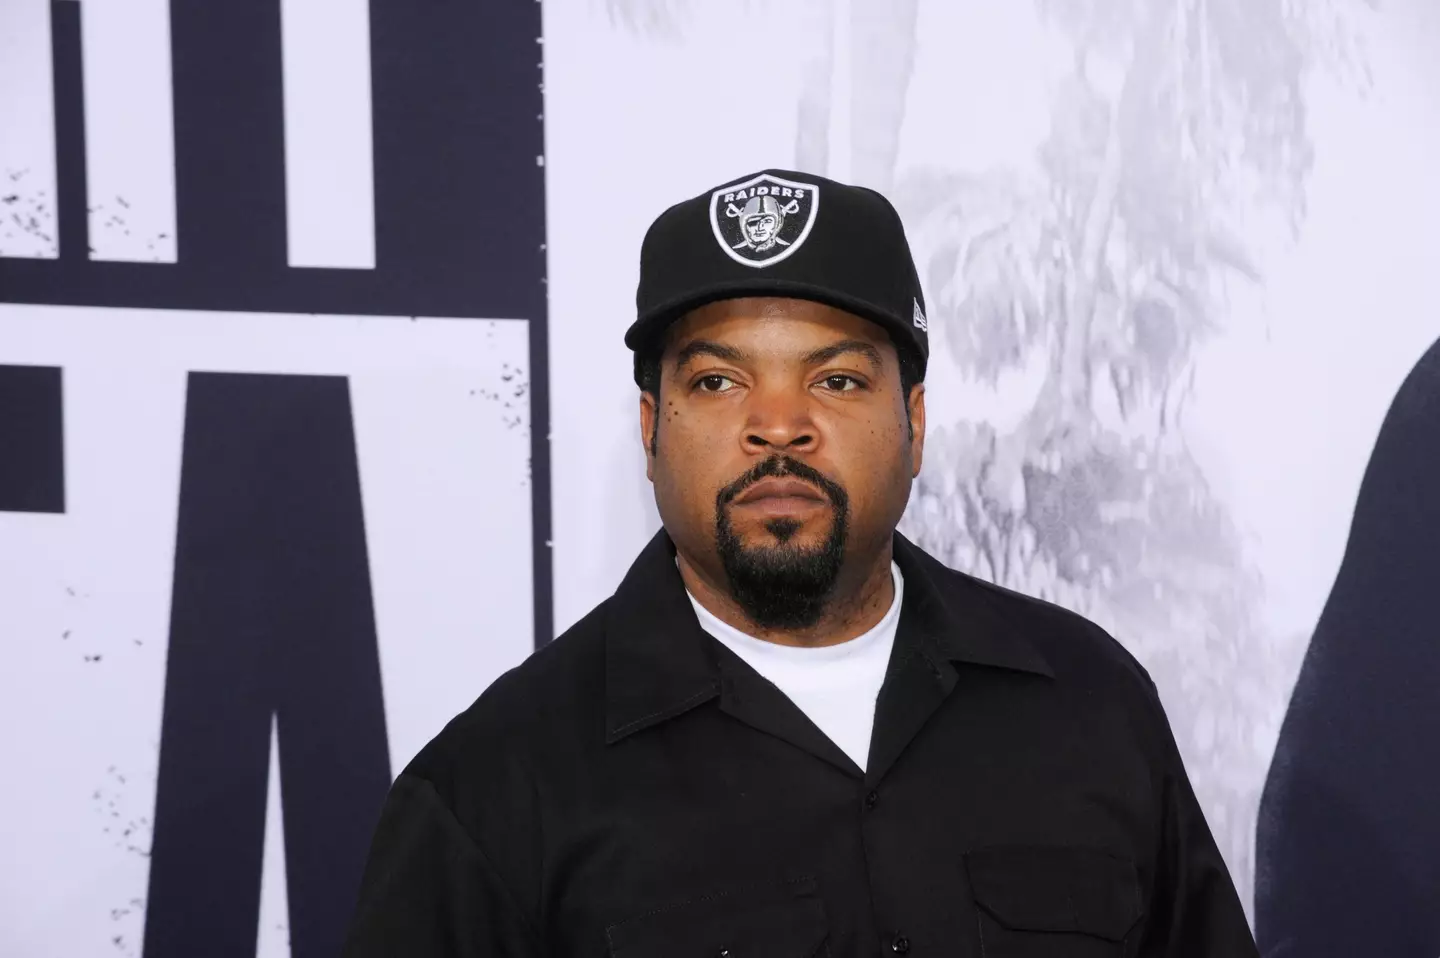 Ice Cube attends the Straight Outta Compton world premiere at L.A. Live in 2015.